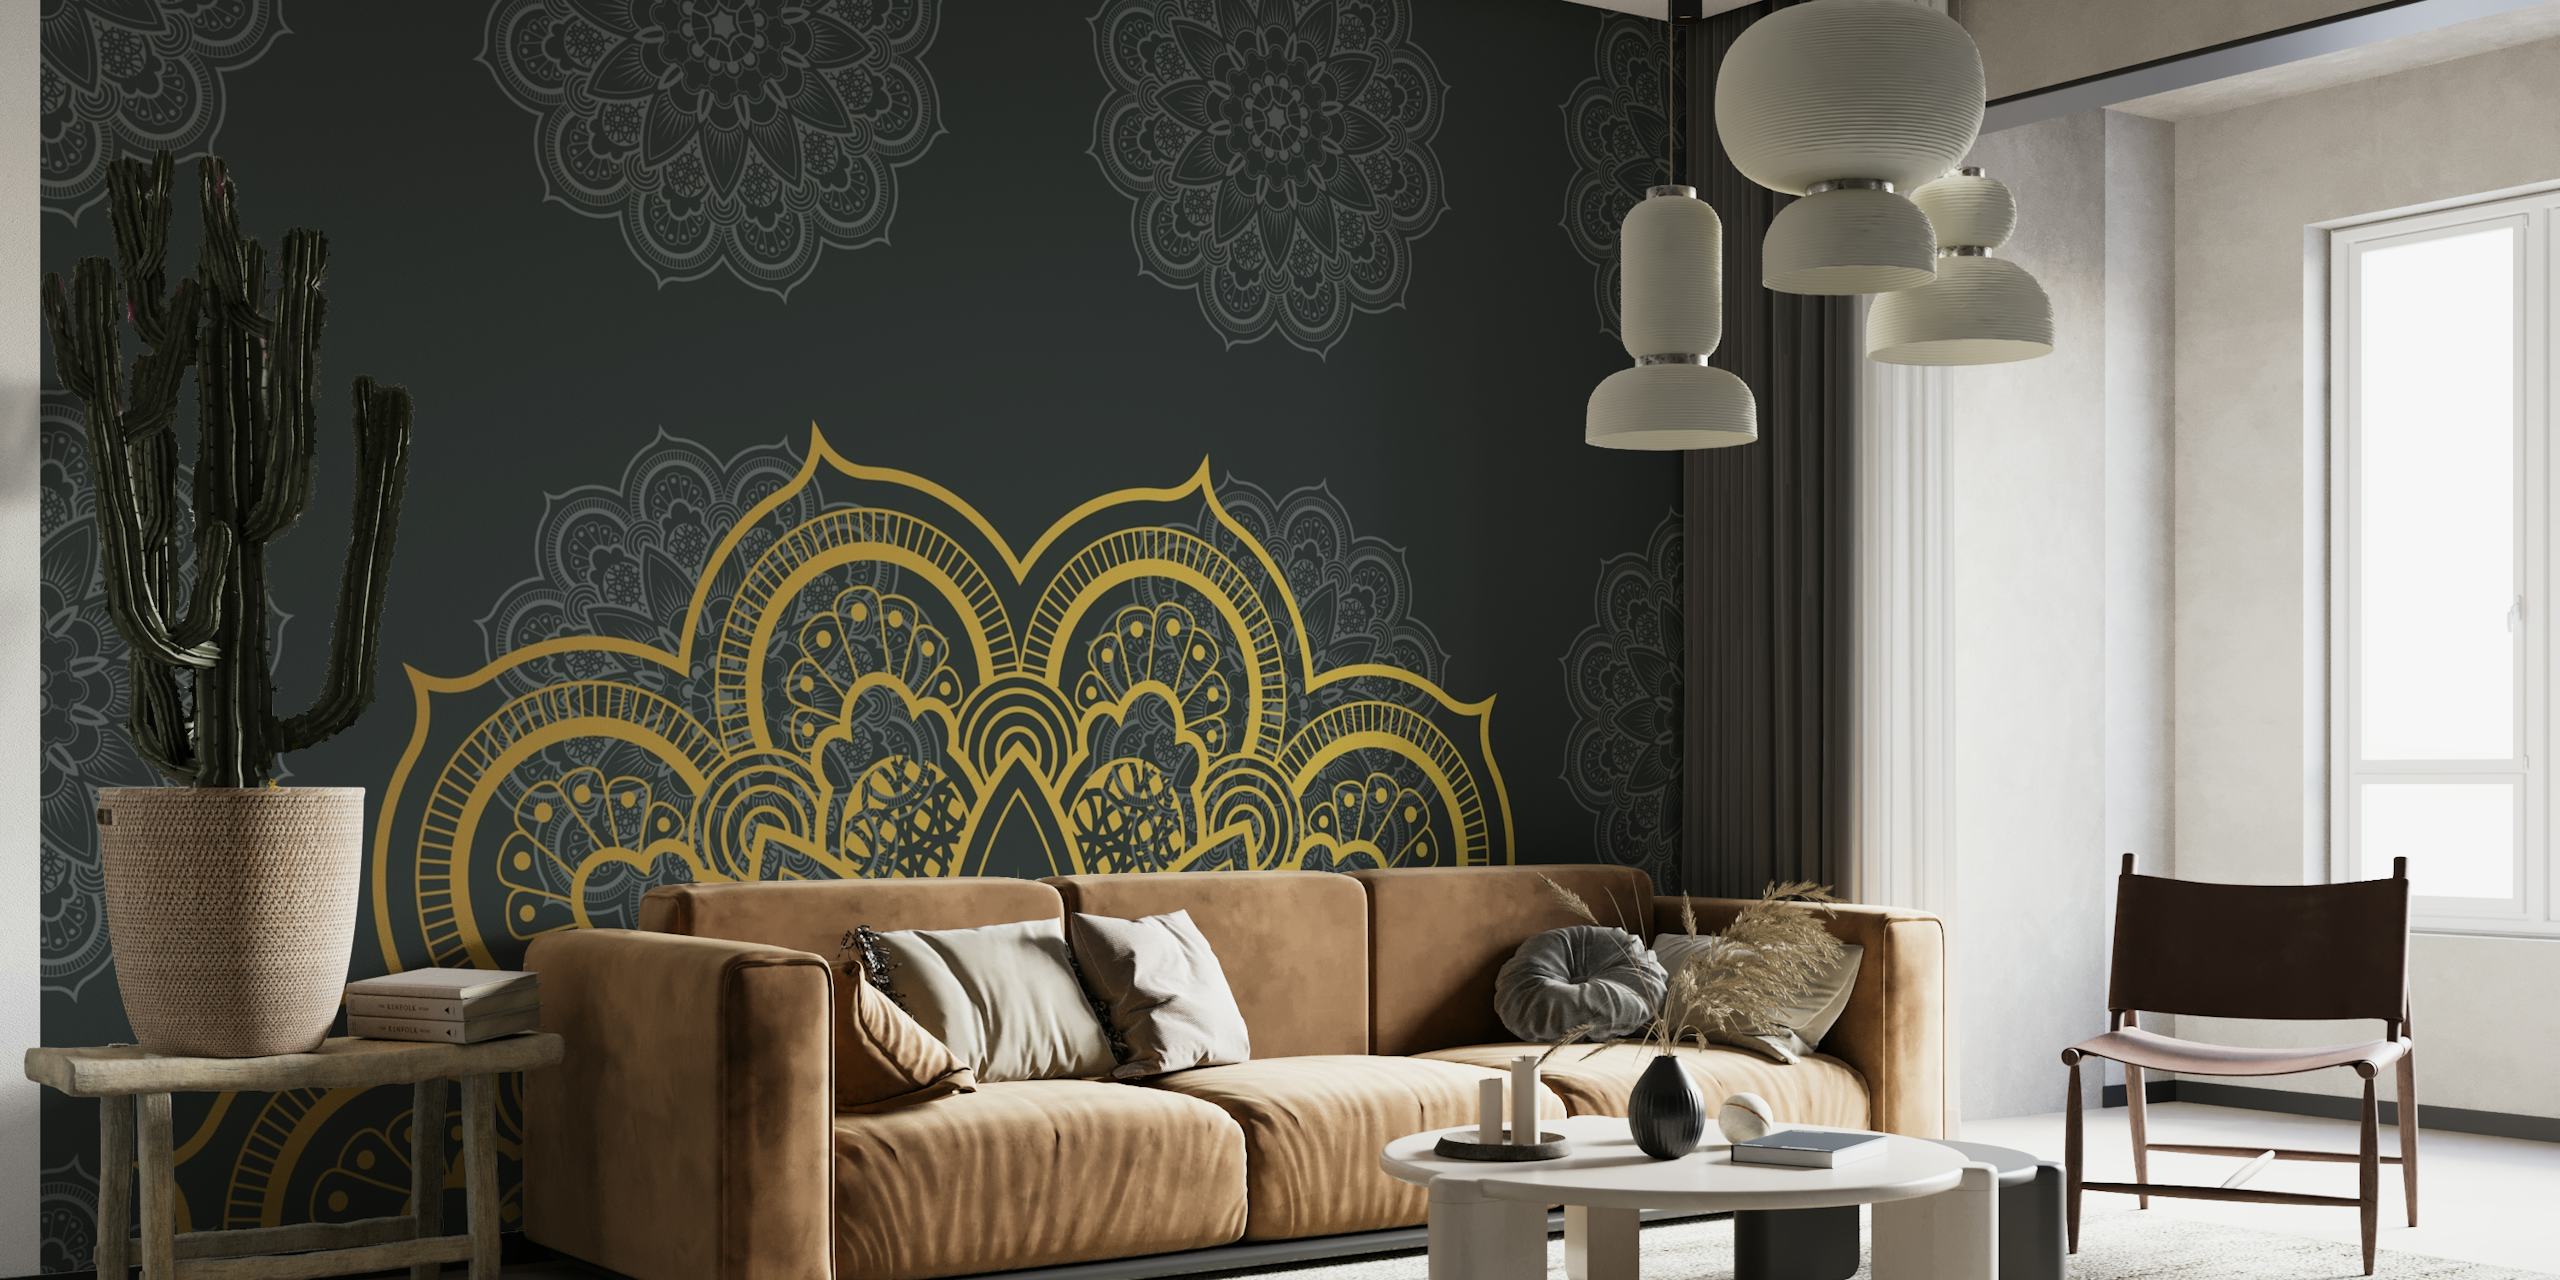 Boho Queen Gold wall mural with intricate mandala designs and shimmering gold accents